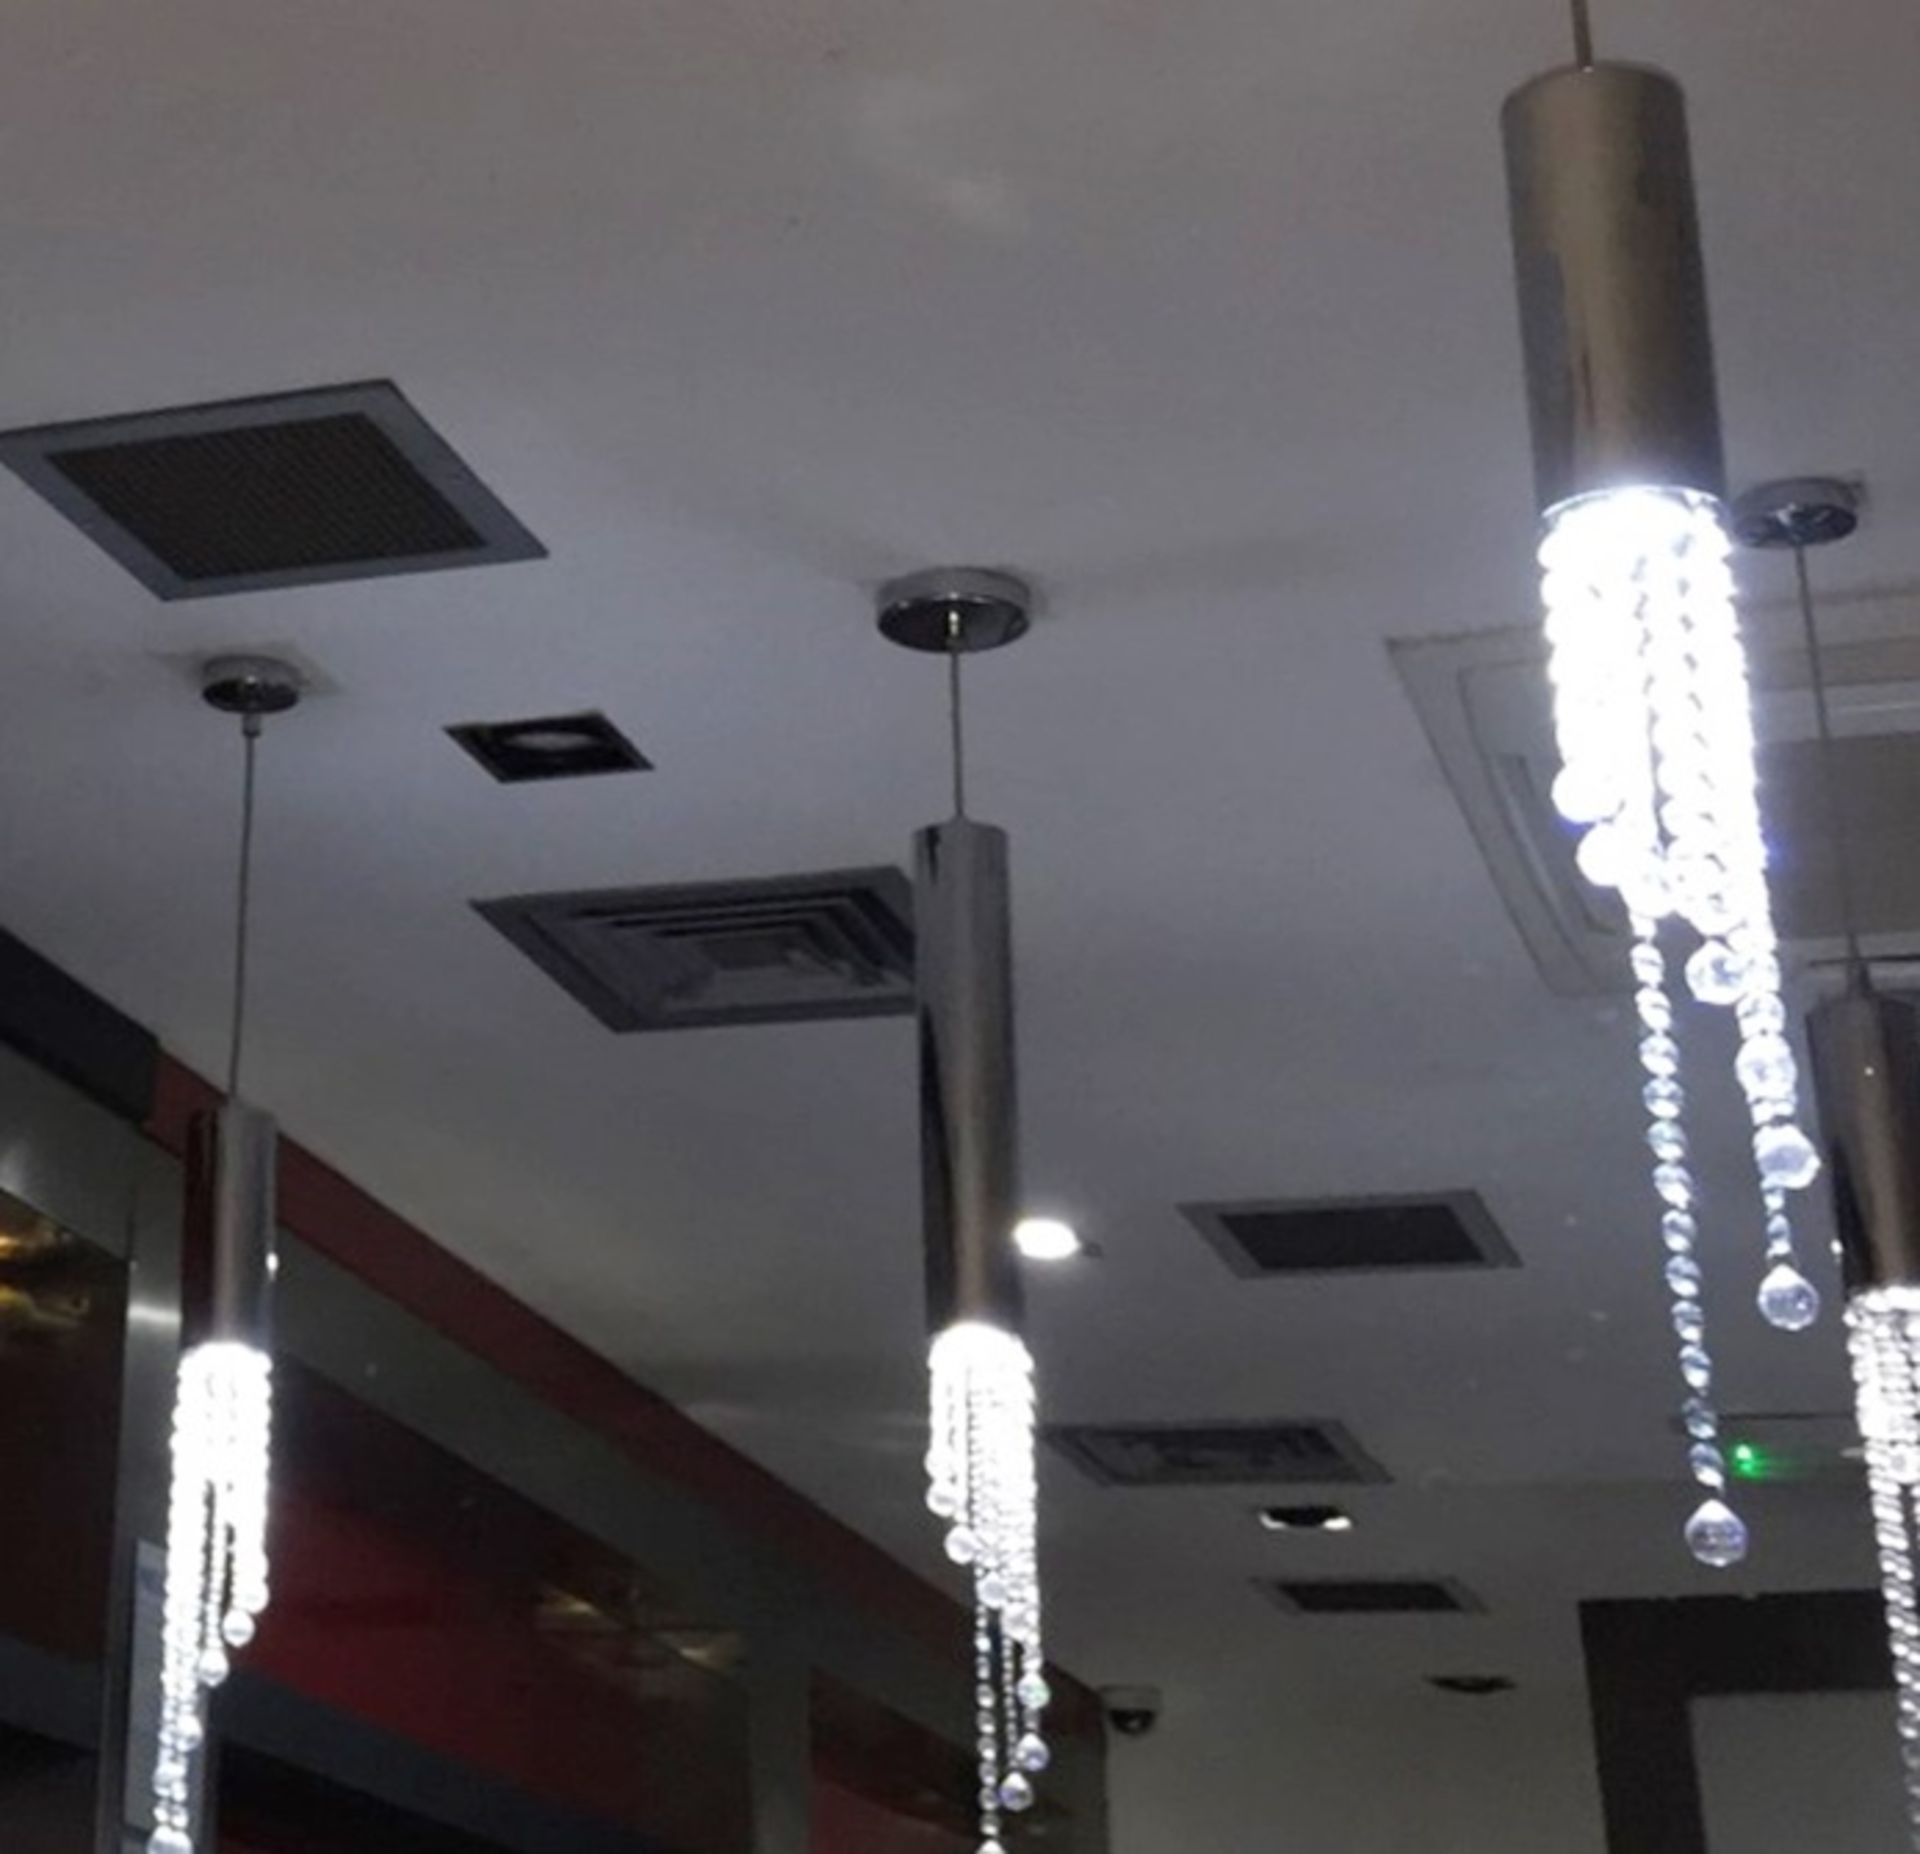 3 x Contemporary Pendant Ceiling Lights With Faux Crystal Droplets - CL188 - Ref GF2 - Drop - Image 6 of 6